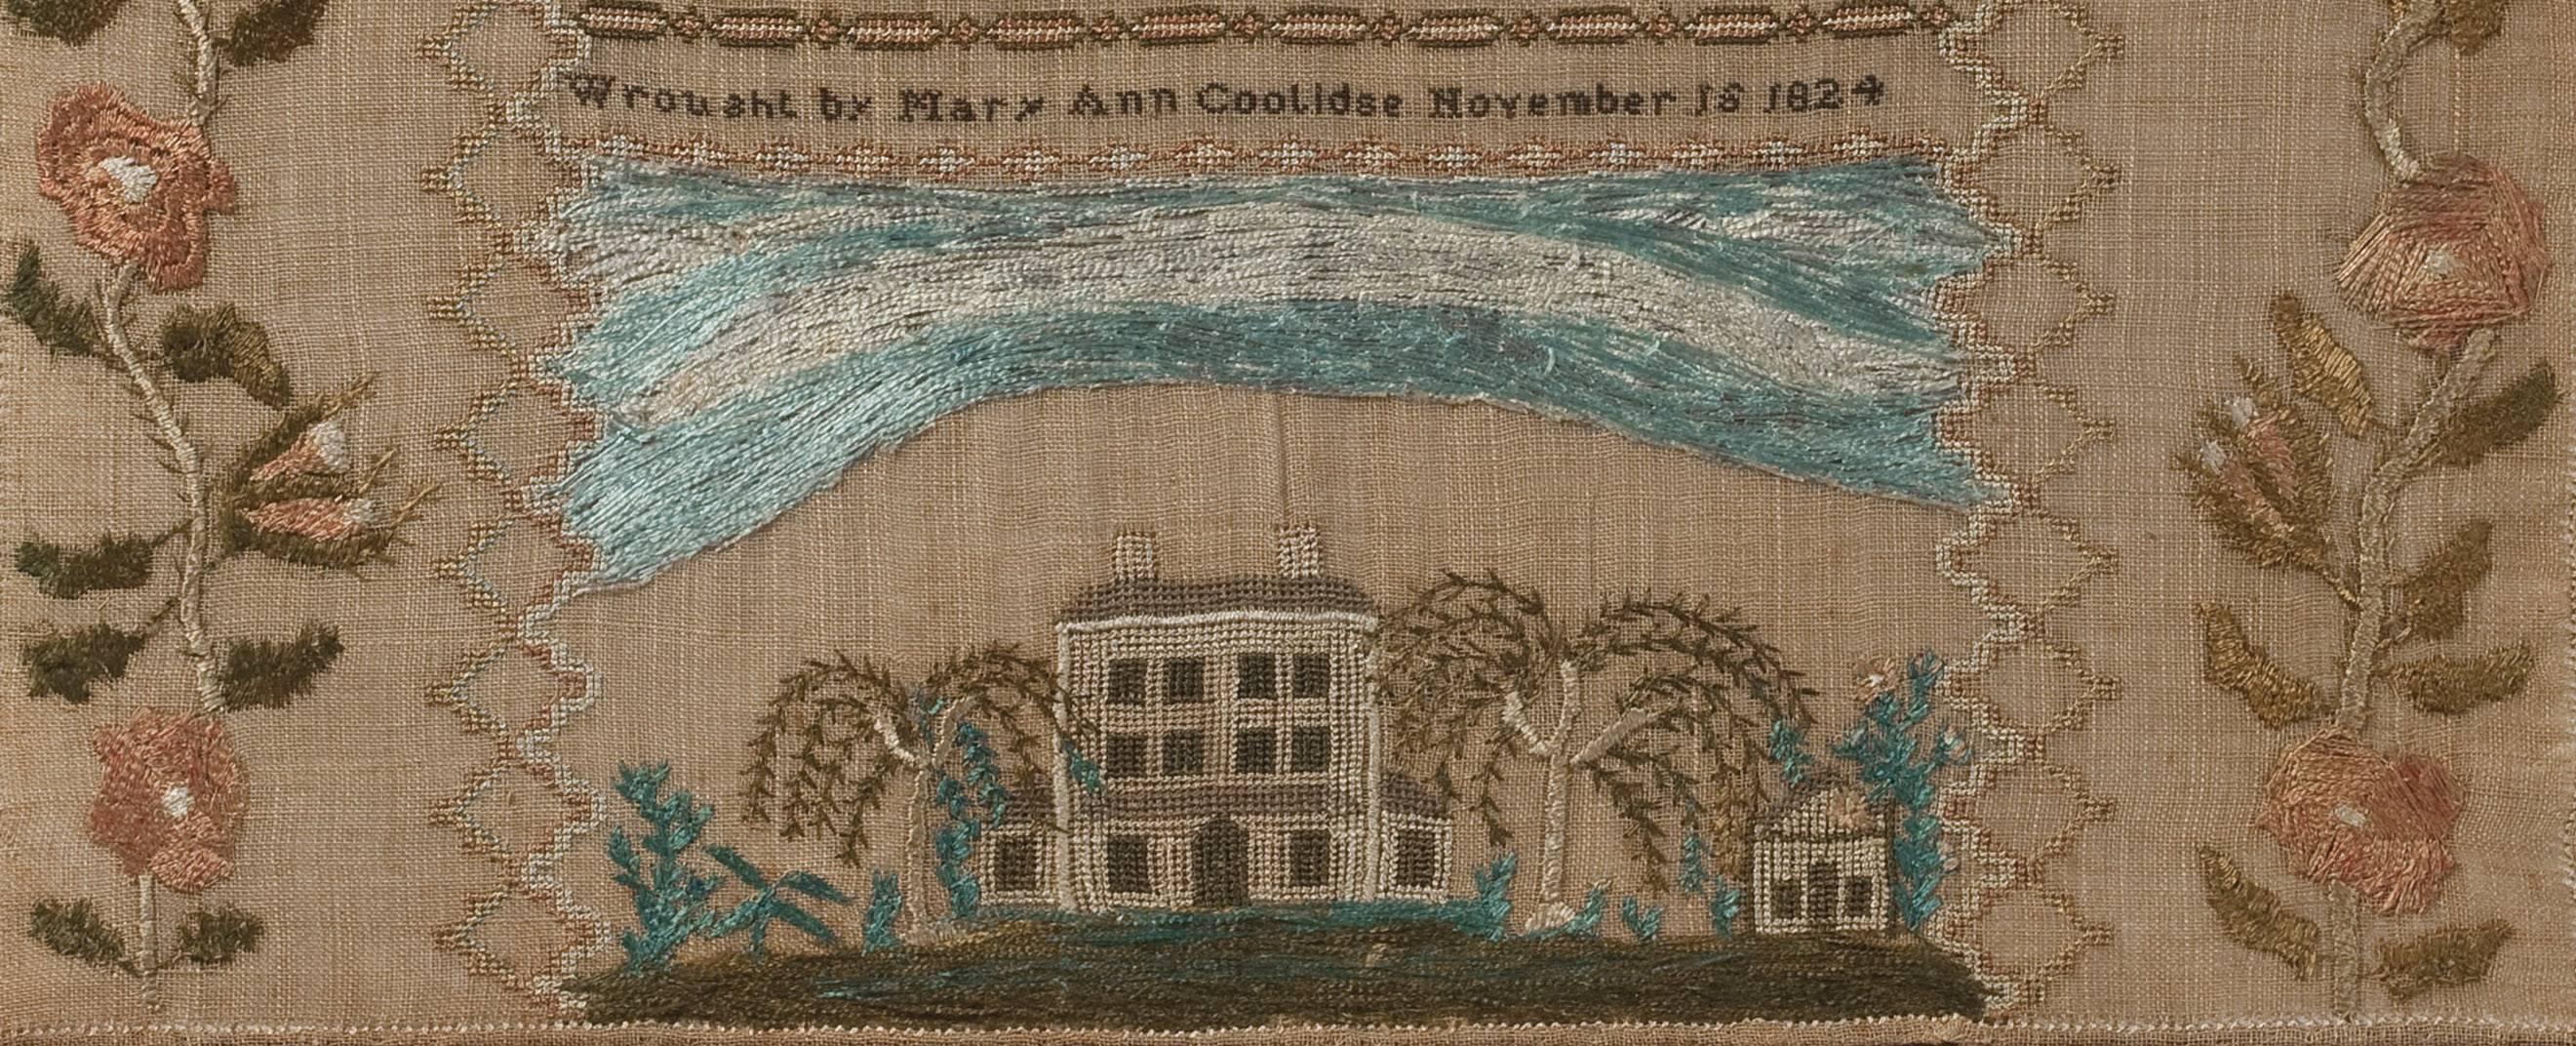 Boasting an outstanding composition and excellent needlework, this is a fine and Classic New England sampler made in 1824 by Mary Ann Coolidge of Cambridge, Massachusetts. The scene along the bottom is a tightly worked vignette featuring a large,